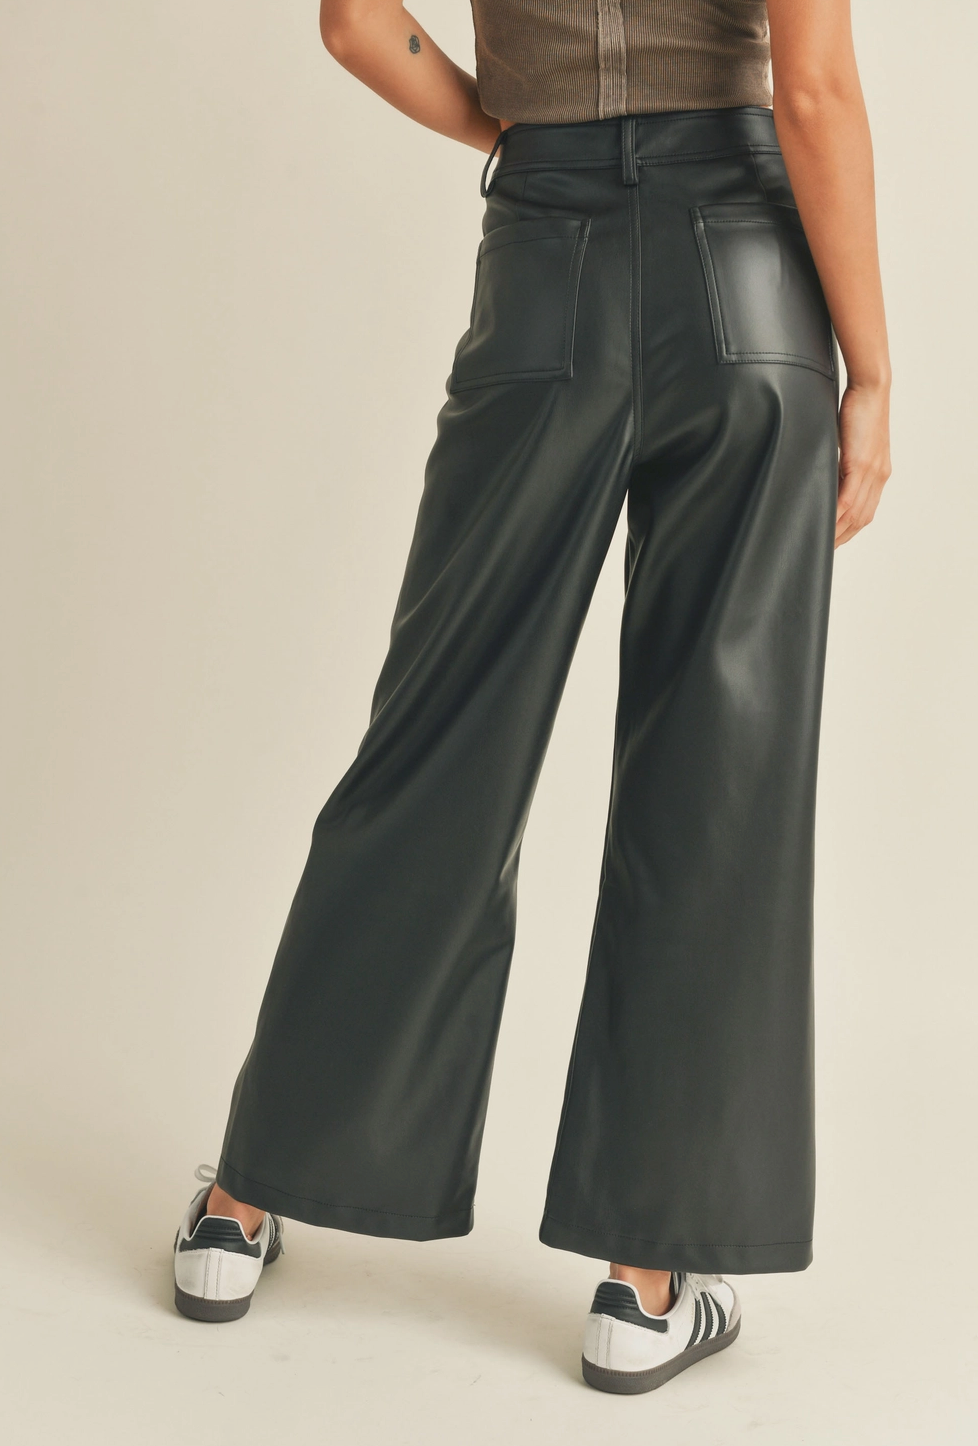 Wide & Straight Leather Pants